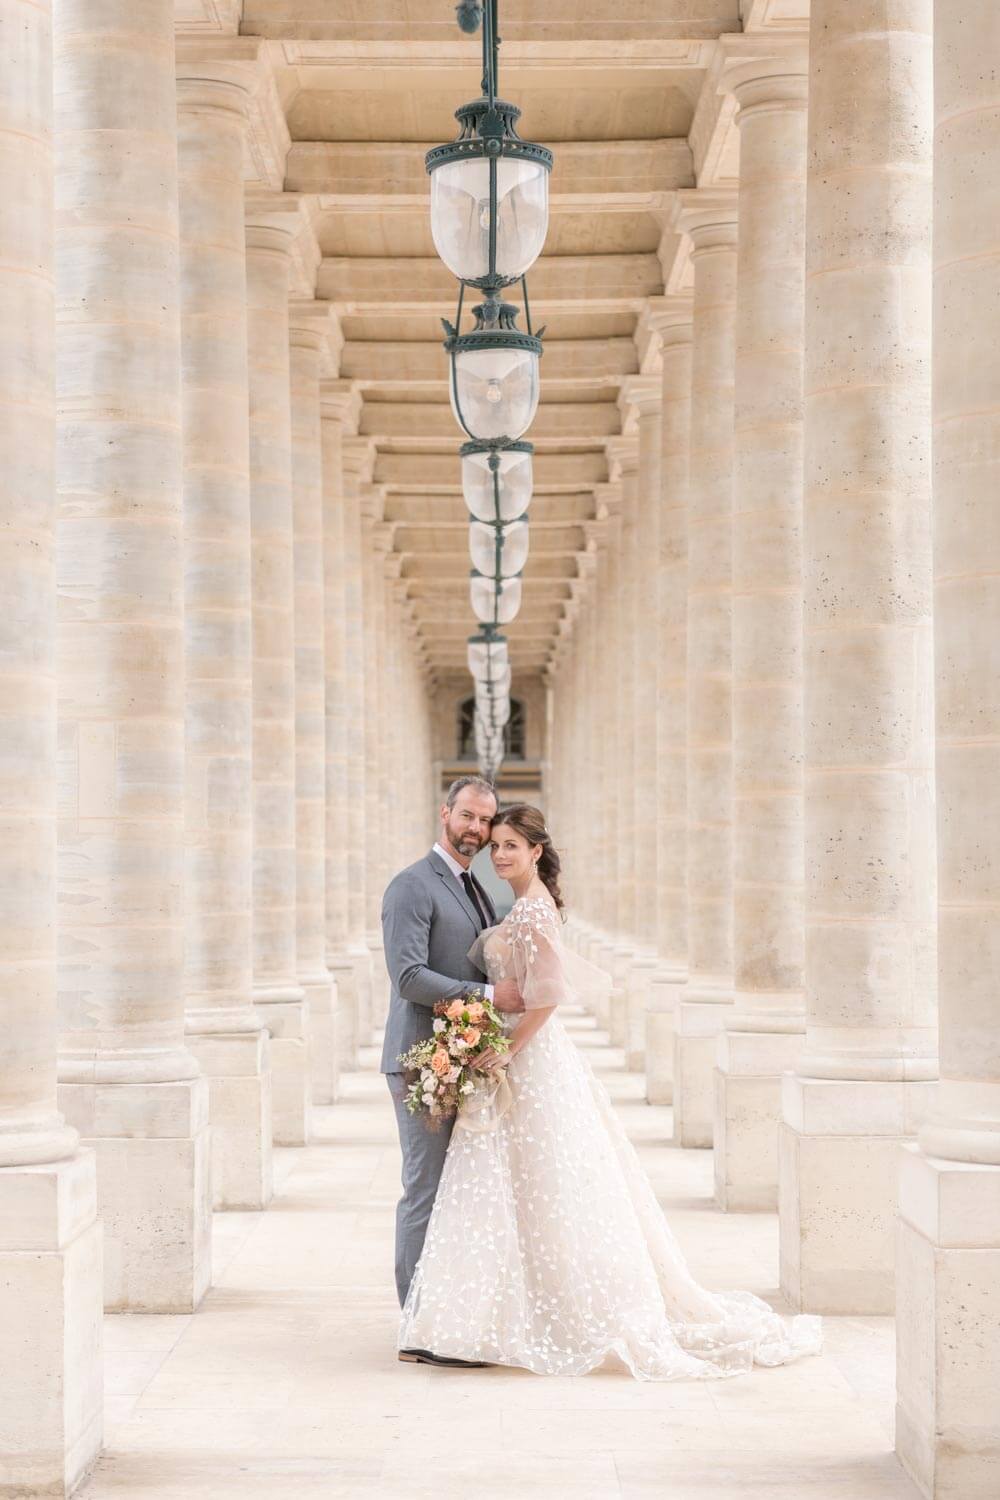 Couple at their elopement wedding in Paris